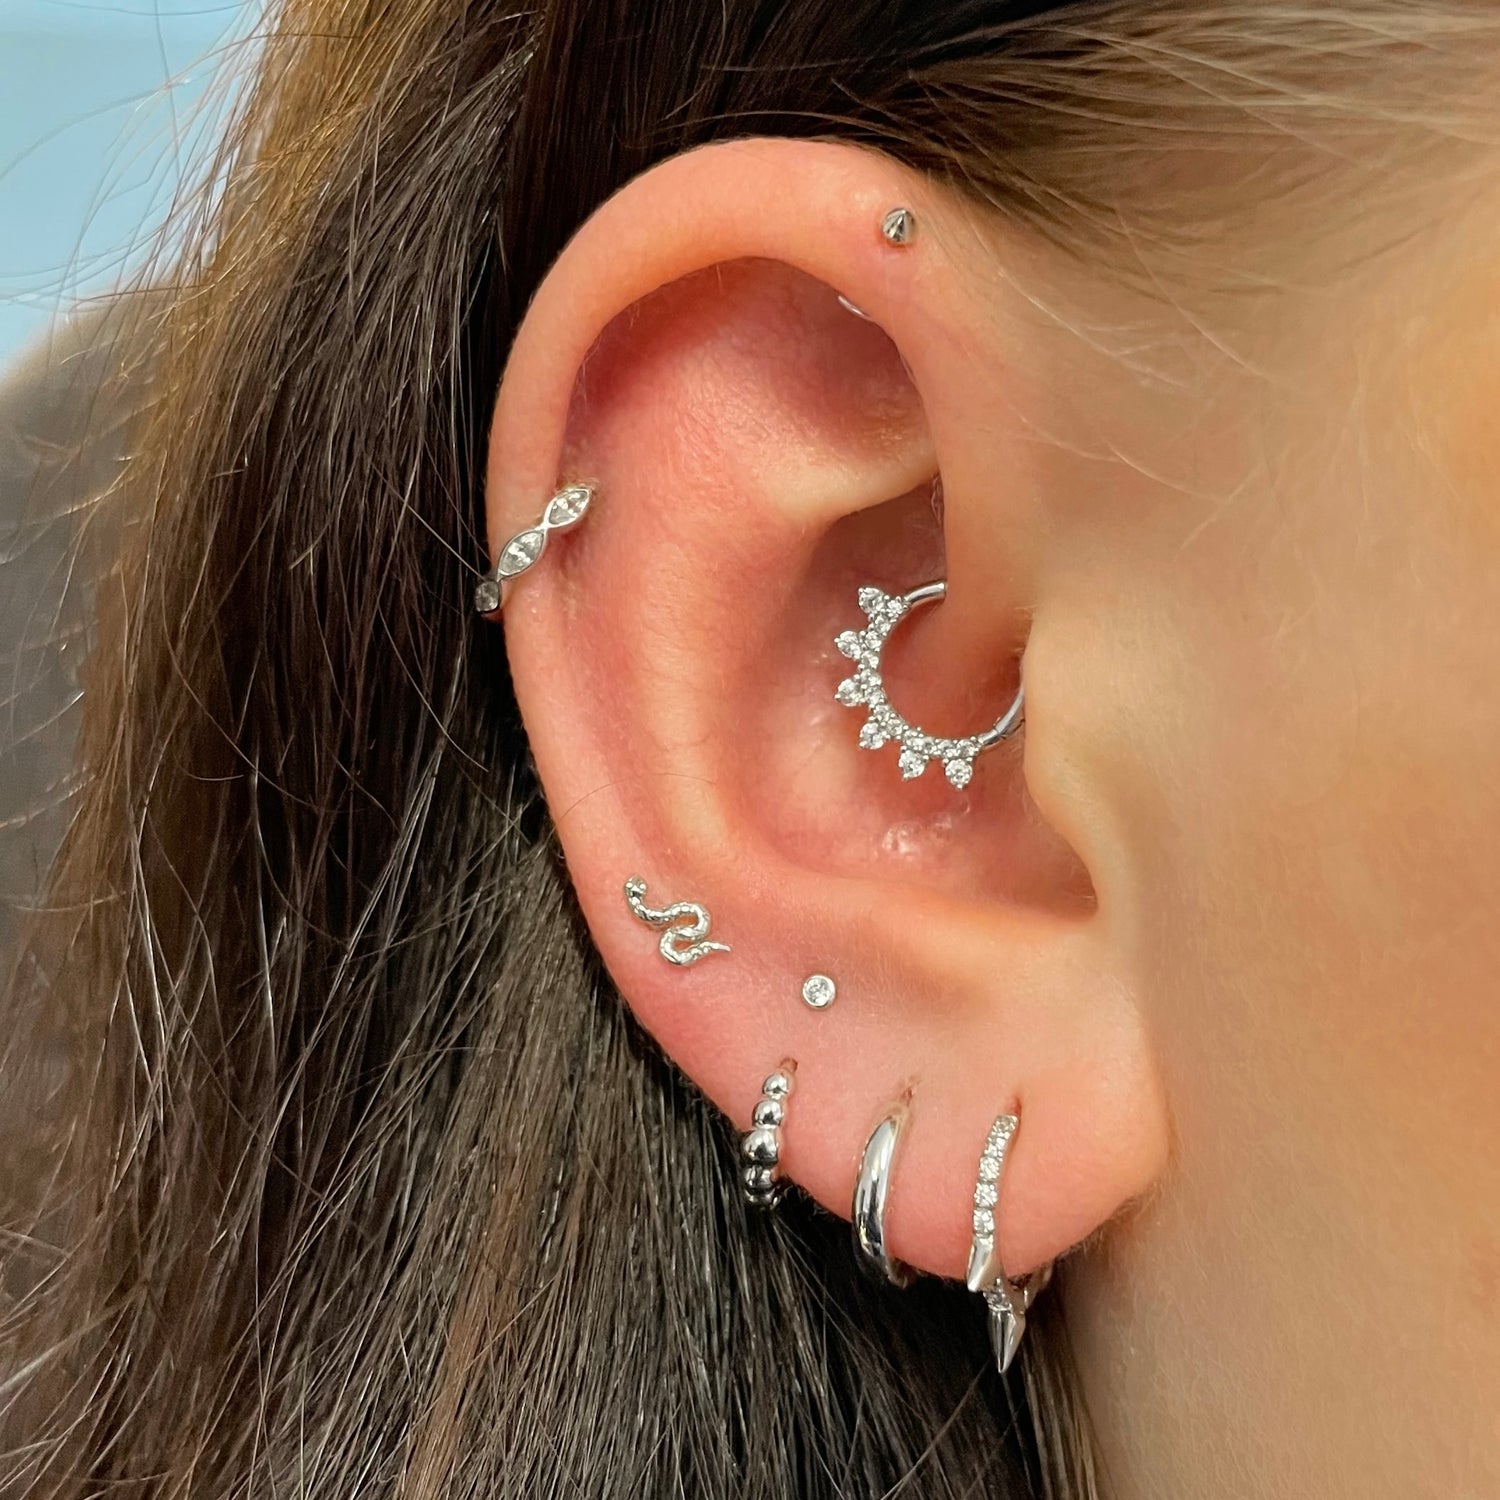 Beautiful jewelry for helix and tragus piercings with a beautiful star